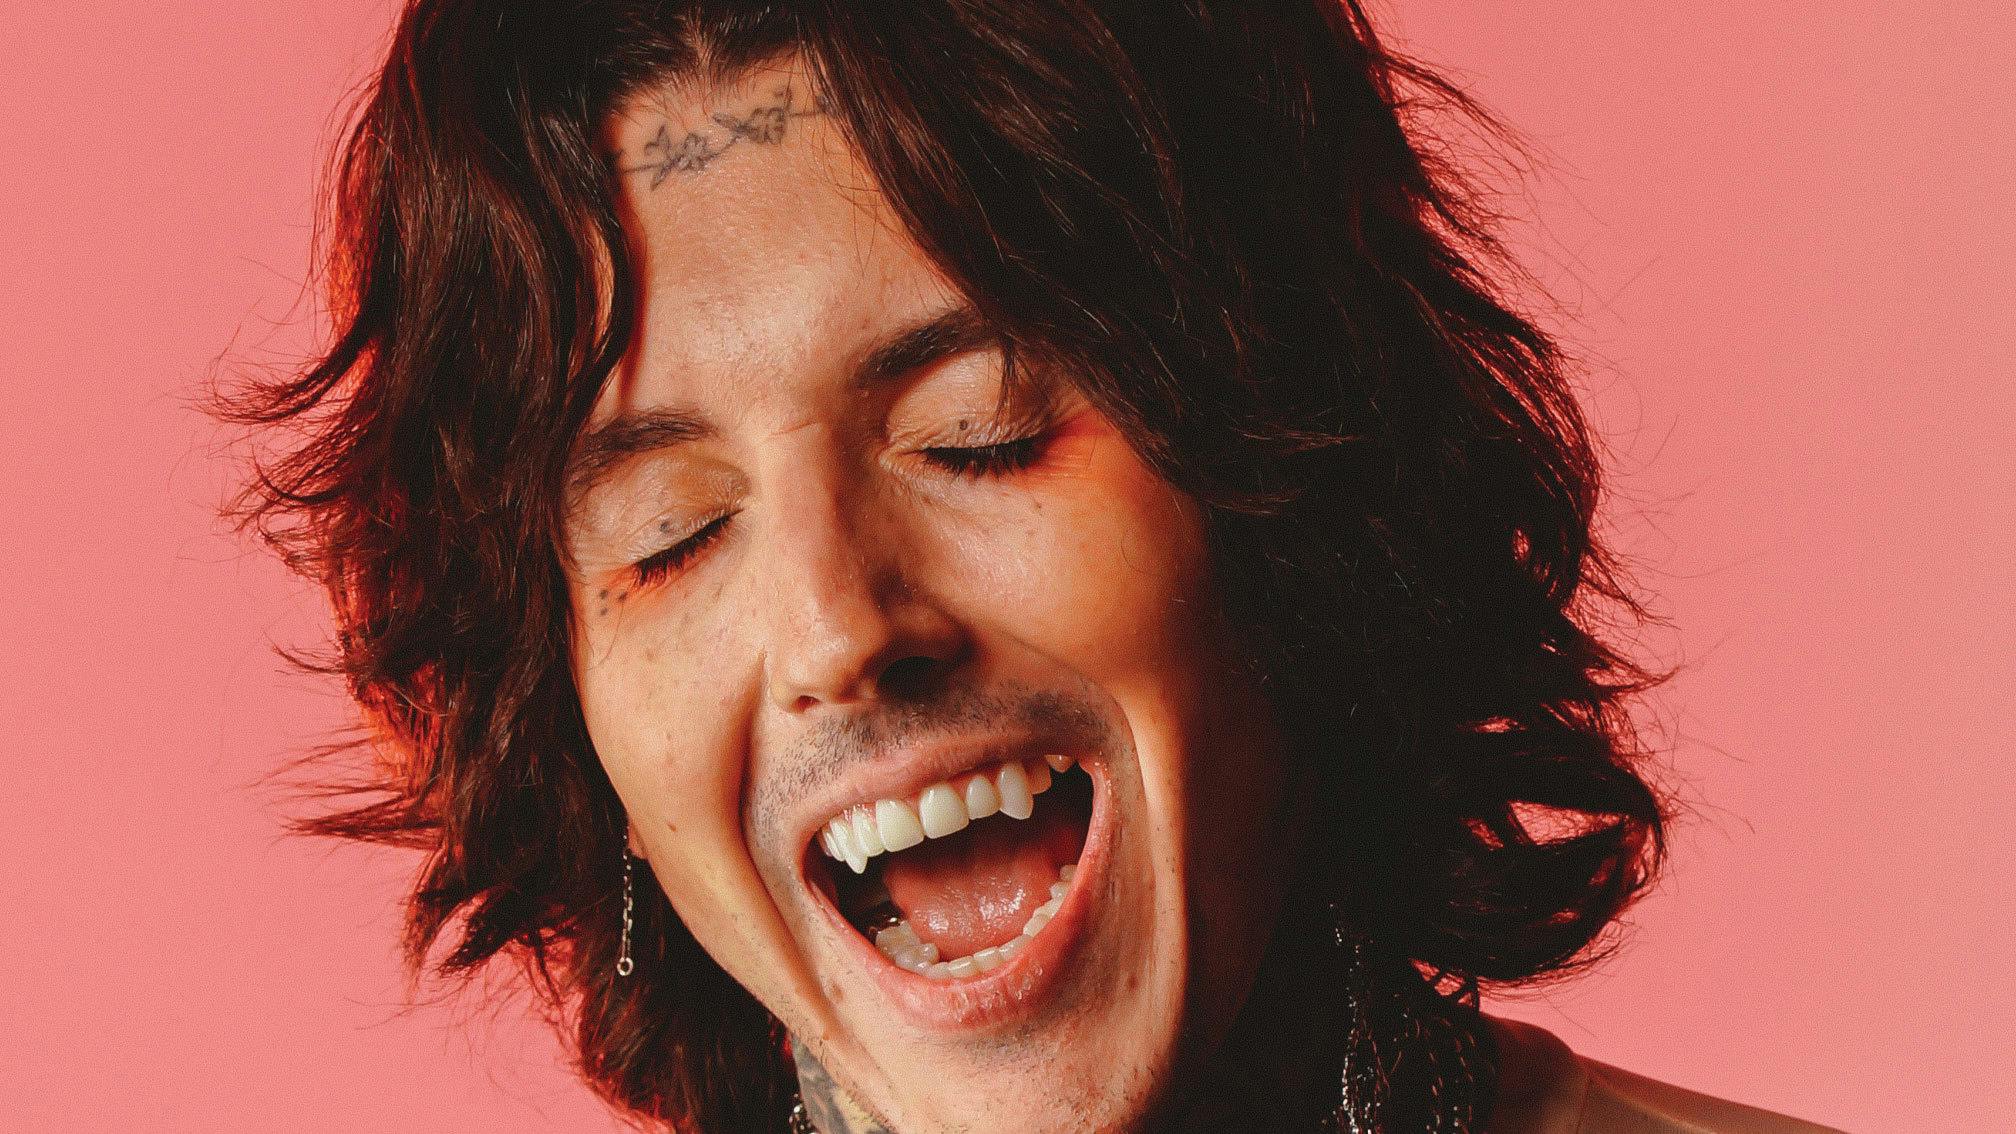 Oli Sykes confirms when the new BMTH album will drop